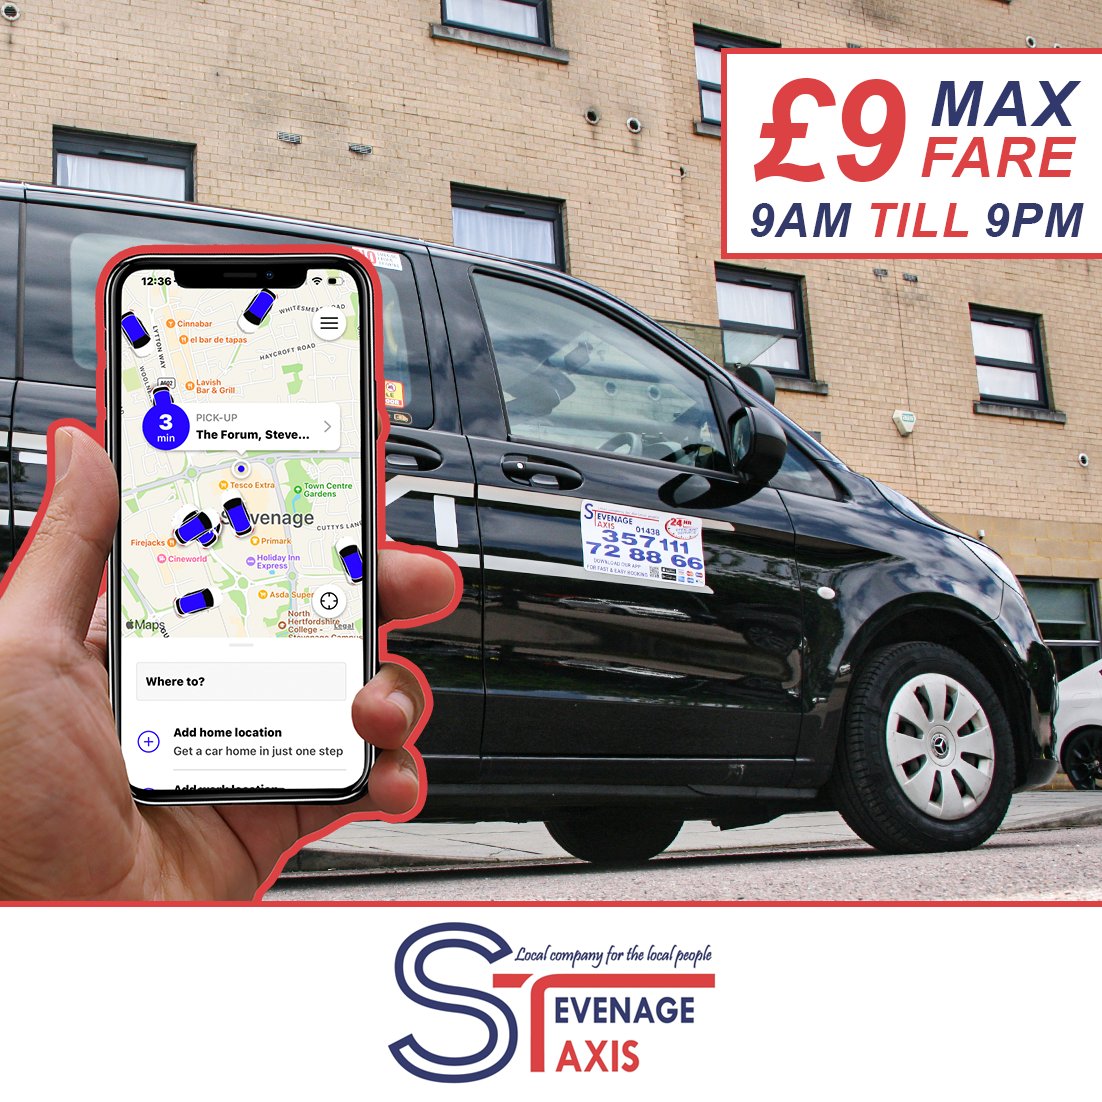 Stevenage Taxis now offers £9 maximum fare for any journey within the Stevenage area, every day! Enjoy convenient, affordable travel without breaking the bank.
#StevenageTaxis #AffordableTravel 🚕💨